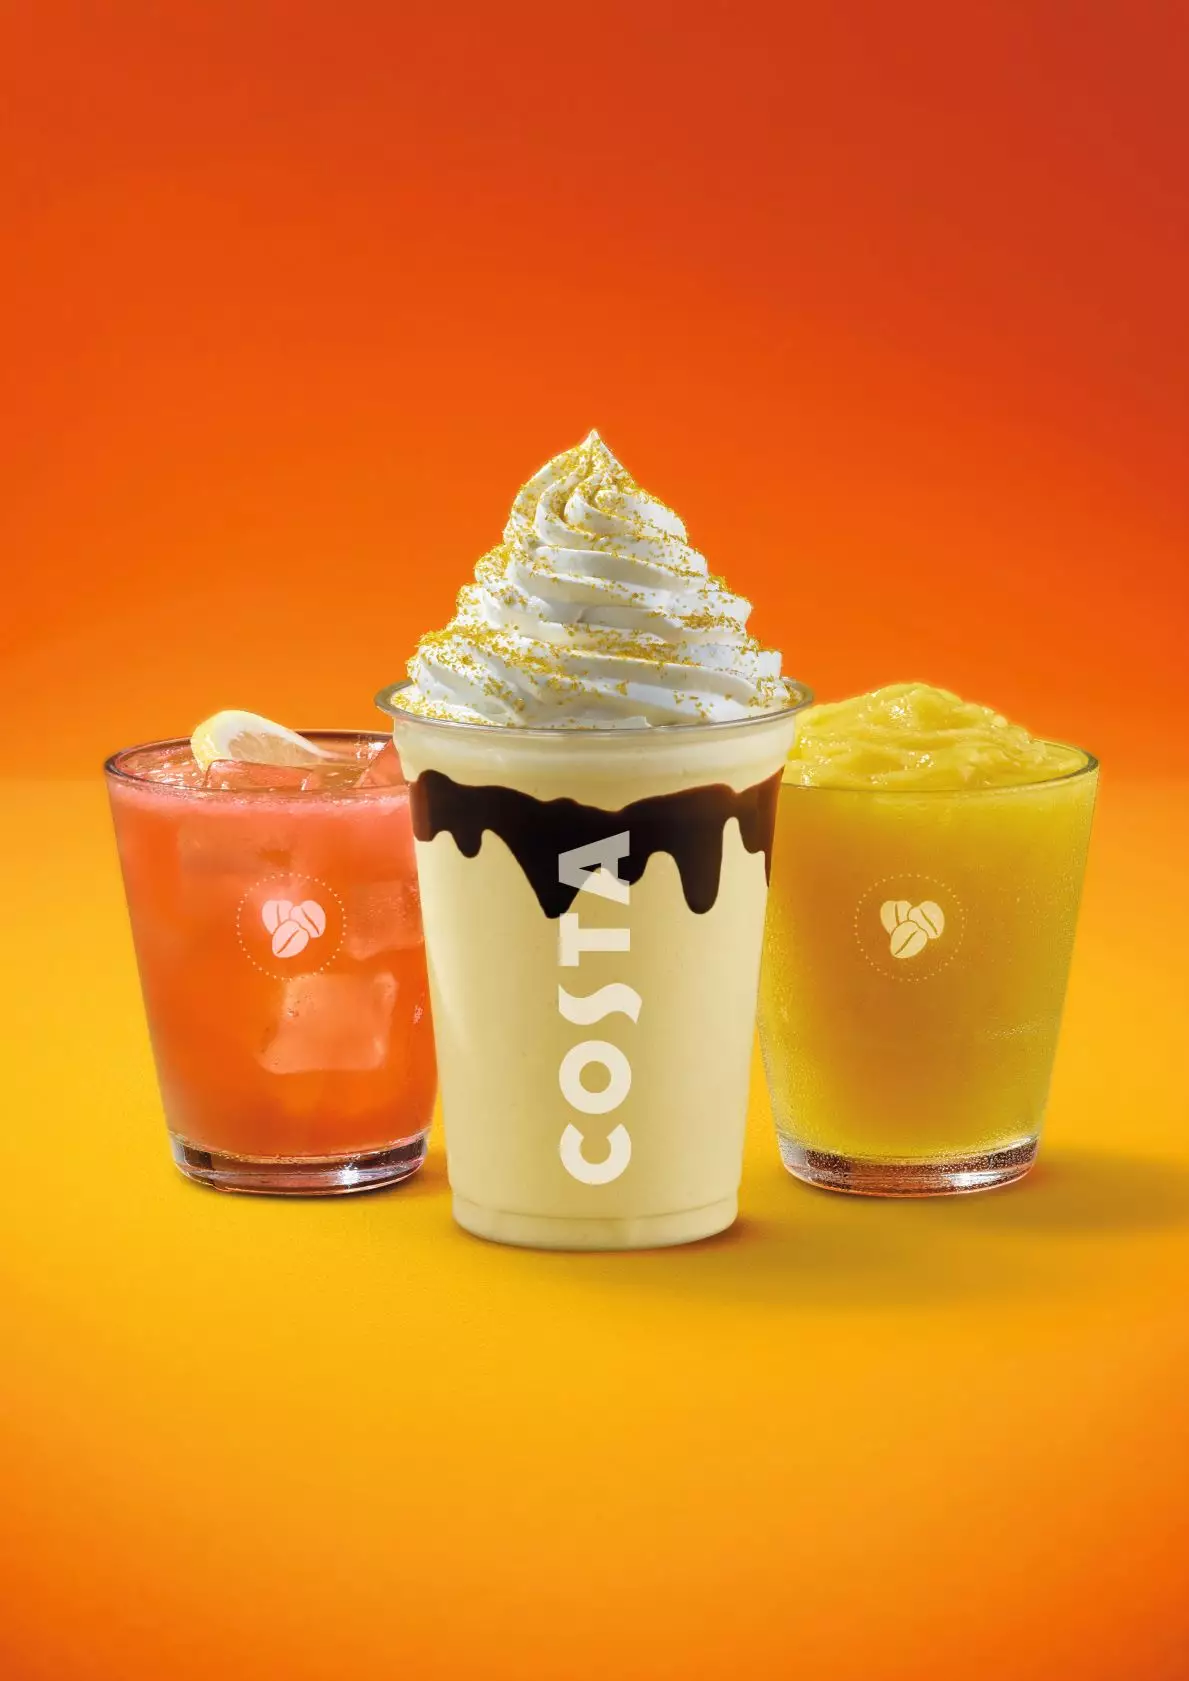 The new drinks are blended with silky honeycomb syrup. Mmm! (